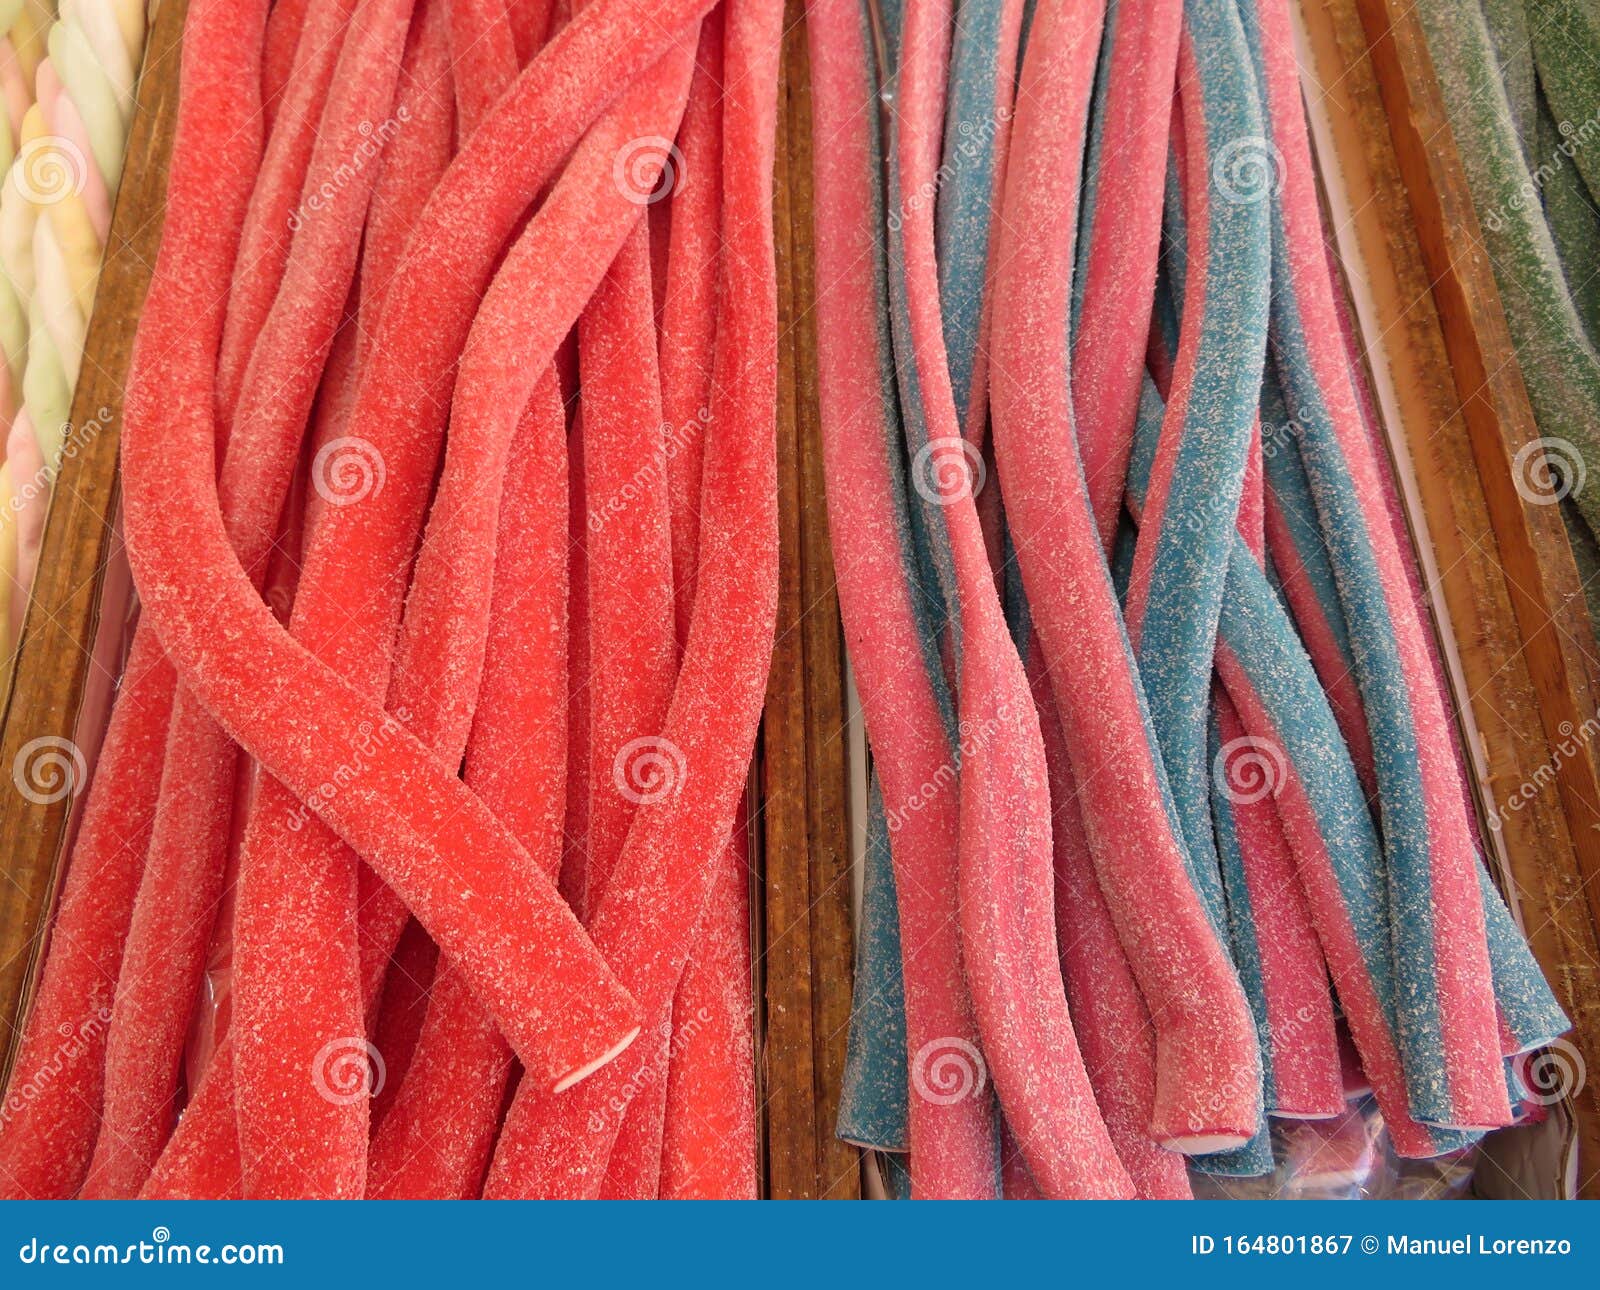 beautiful picture of licorice of colors of great taste